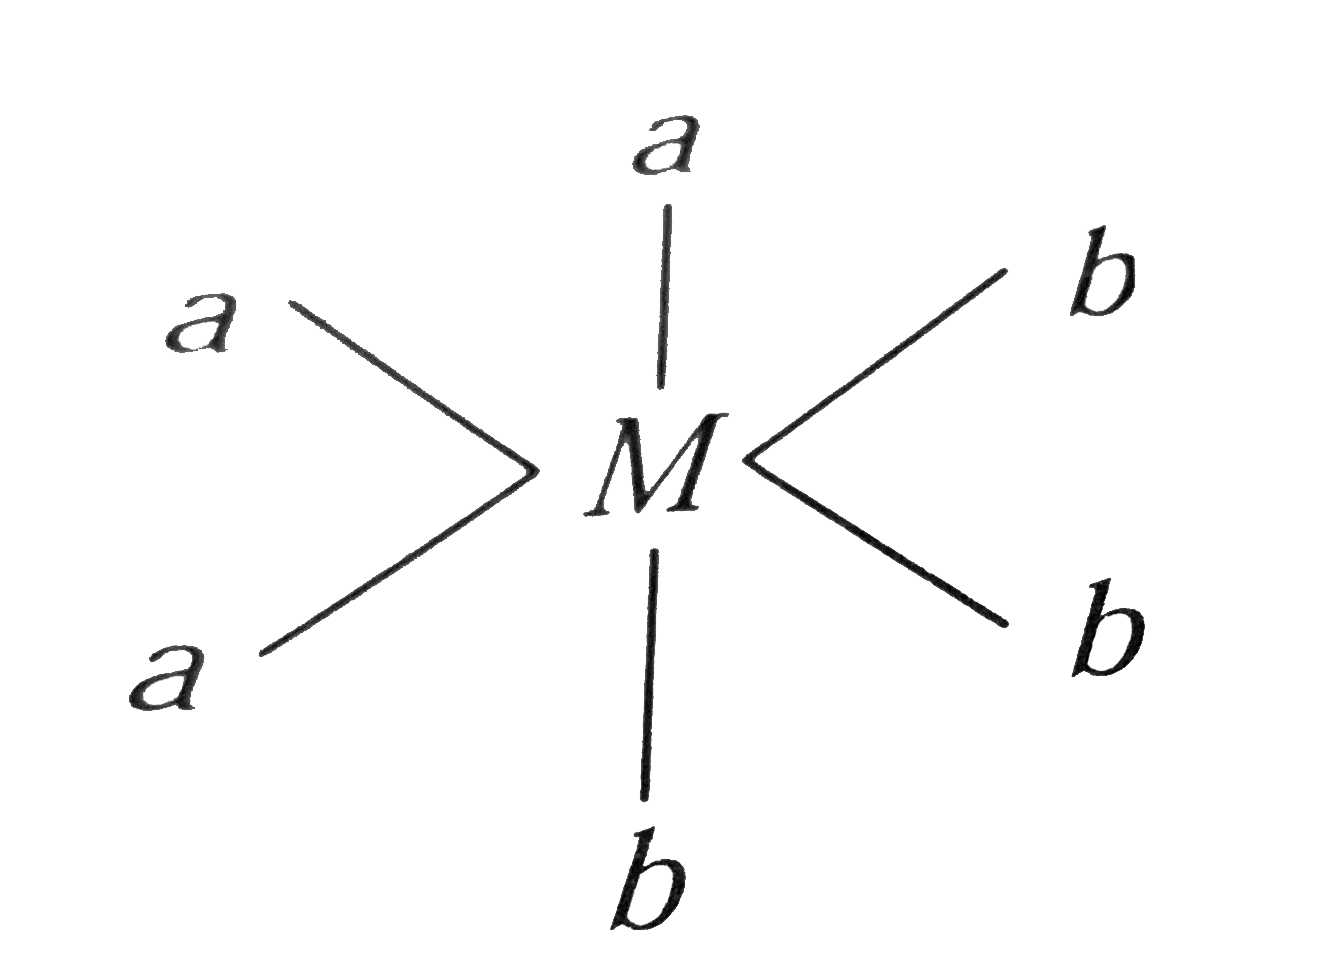 Octahedral complex  shows which form of geometrical isomerism